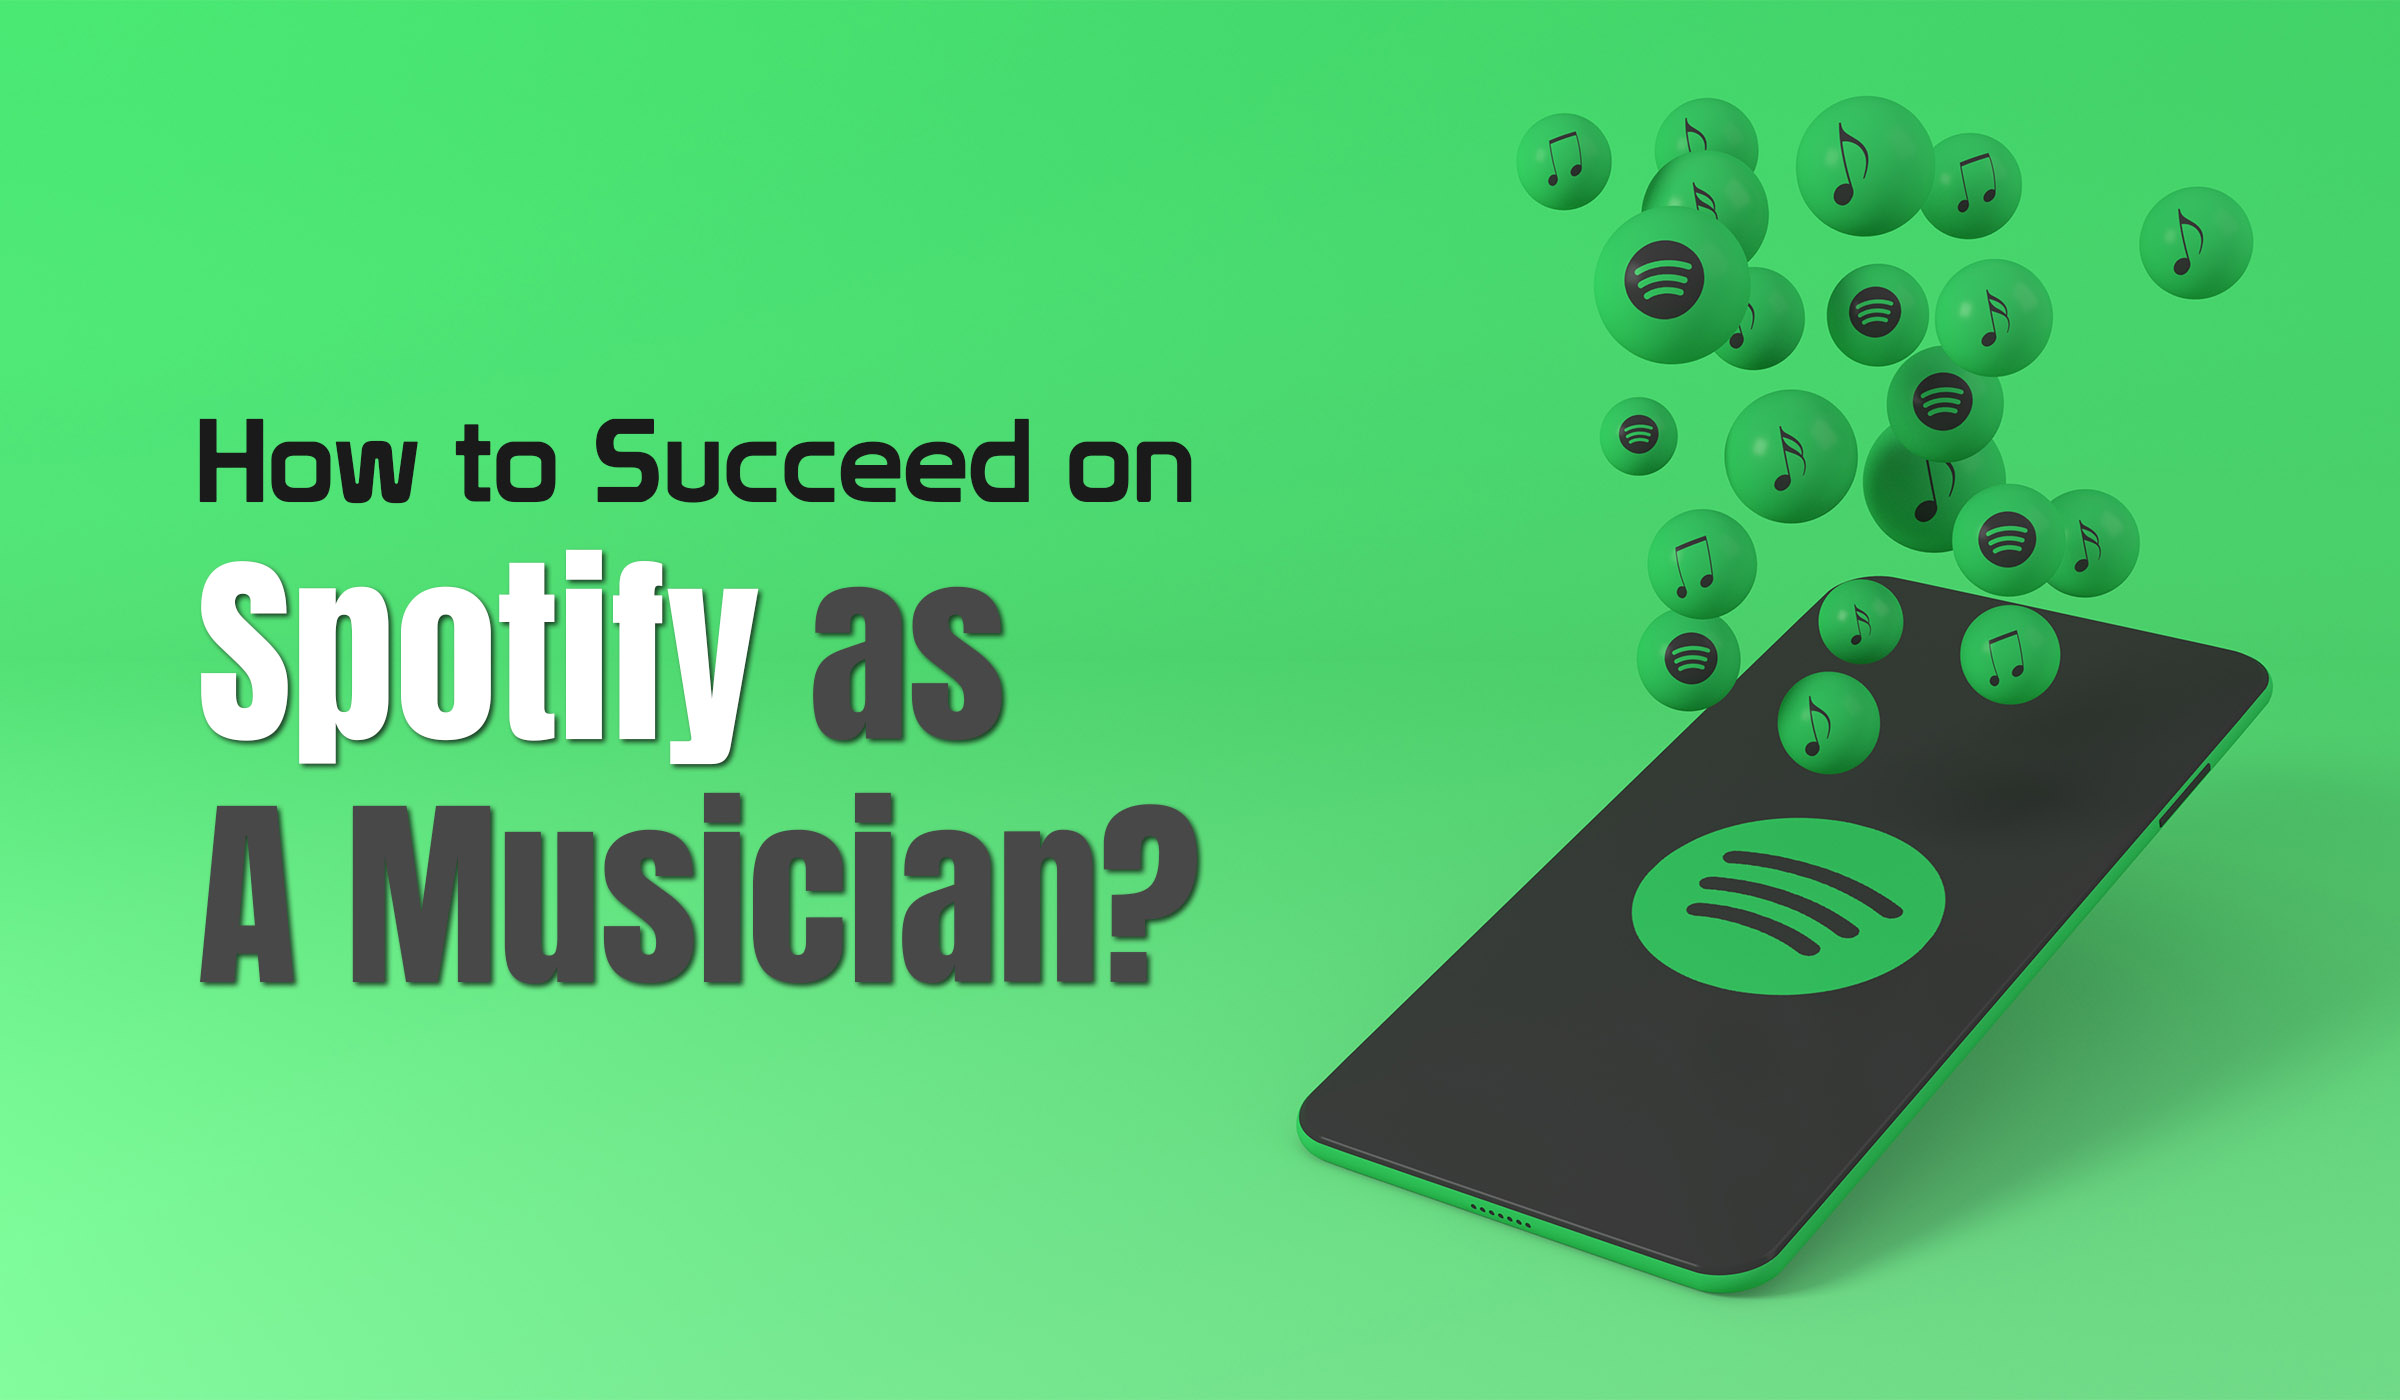 How to Succeed on Spotify as a Musician?